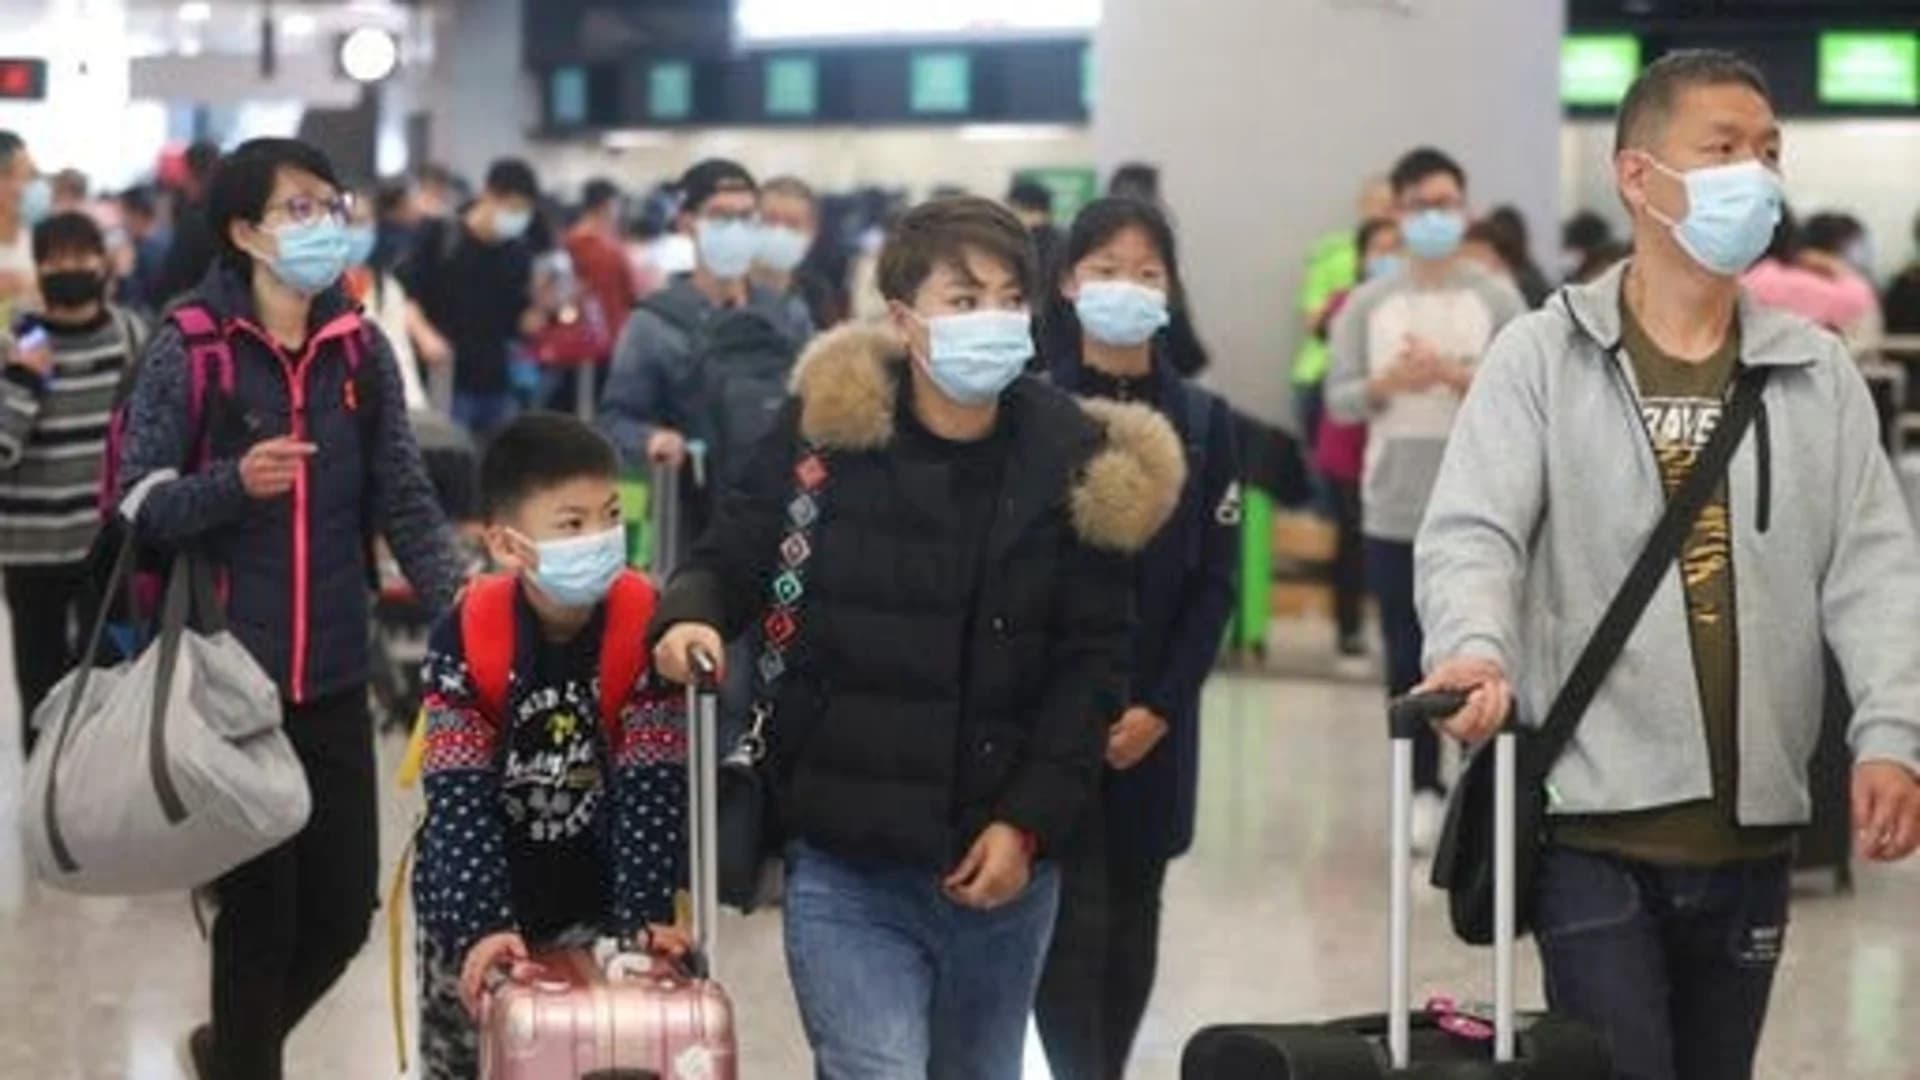 China reports over 1,280 virus cases, death toll at 41